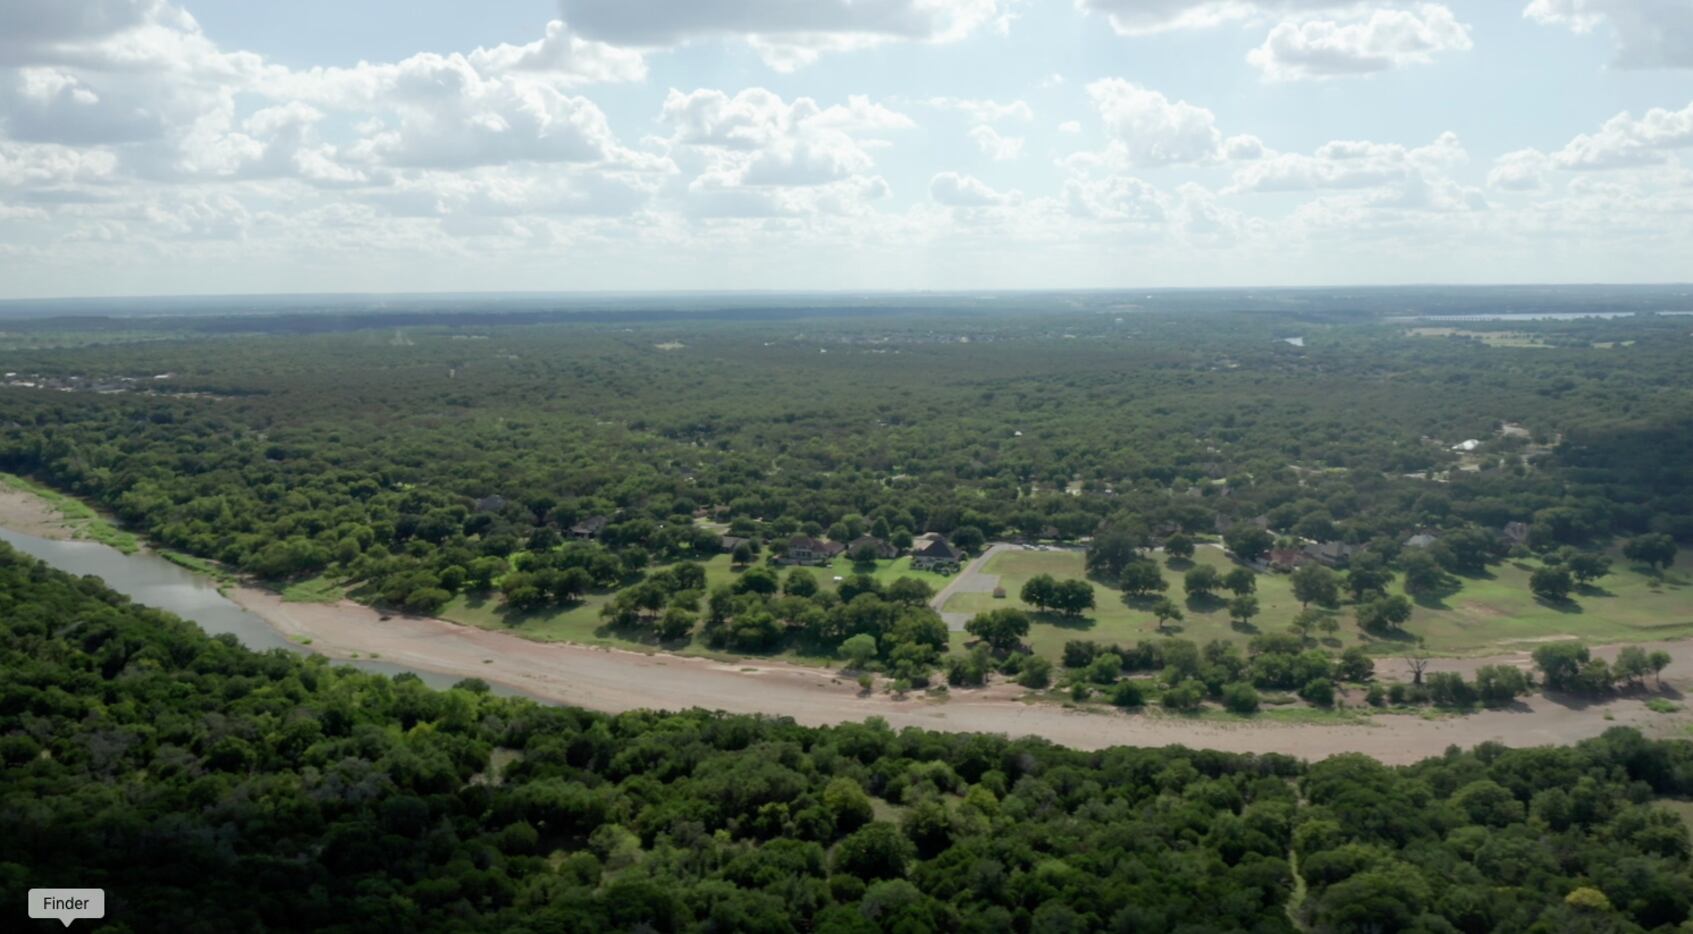 More than 1,500 acres of pecan groves are for sale.